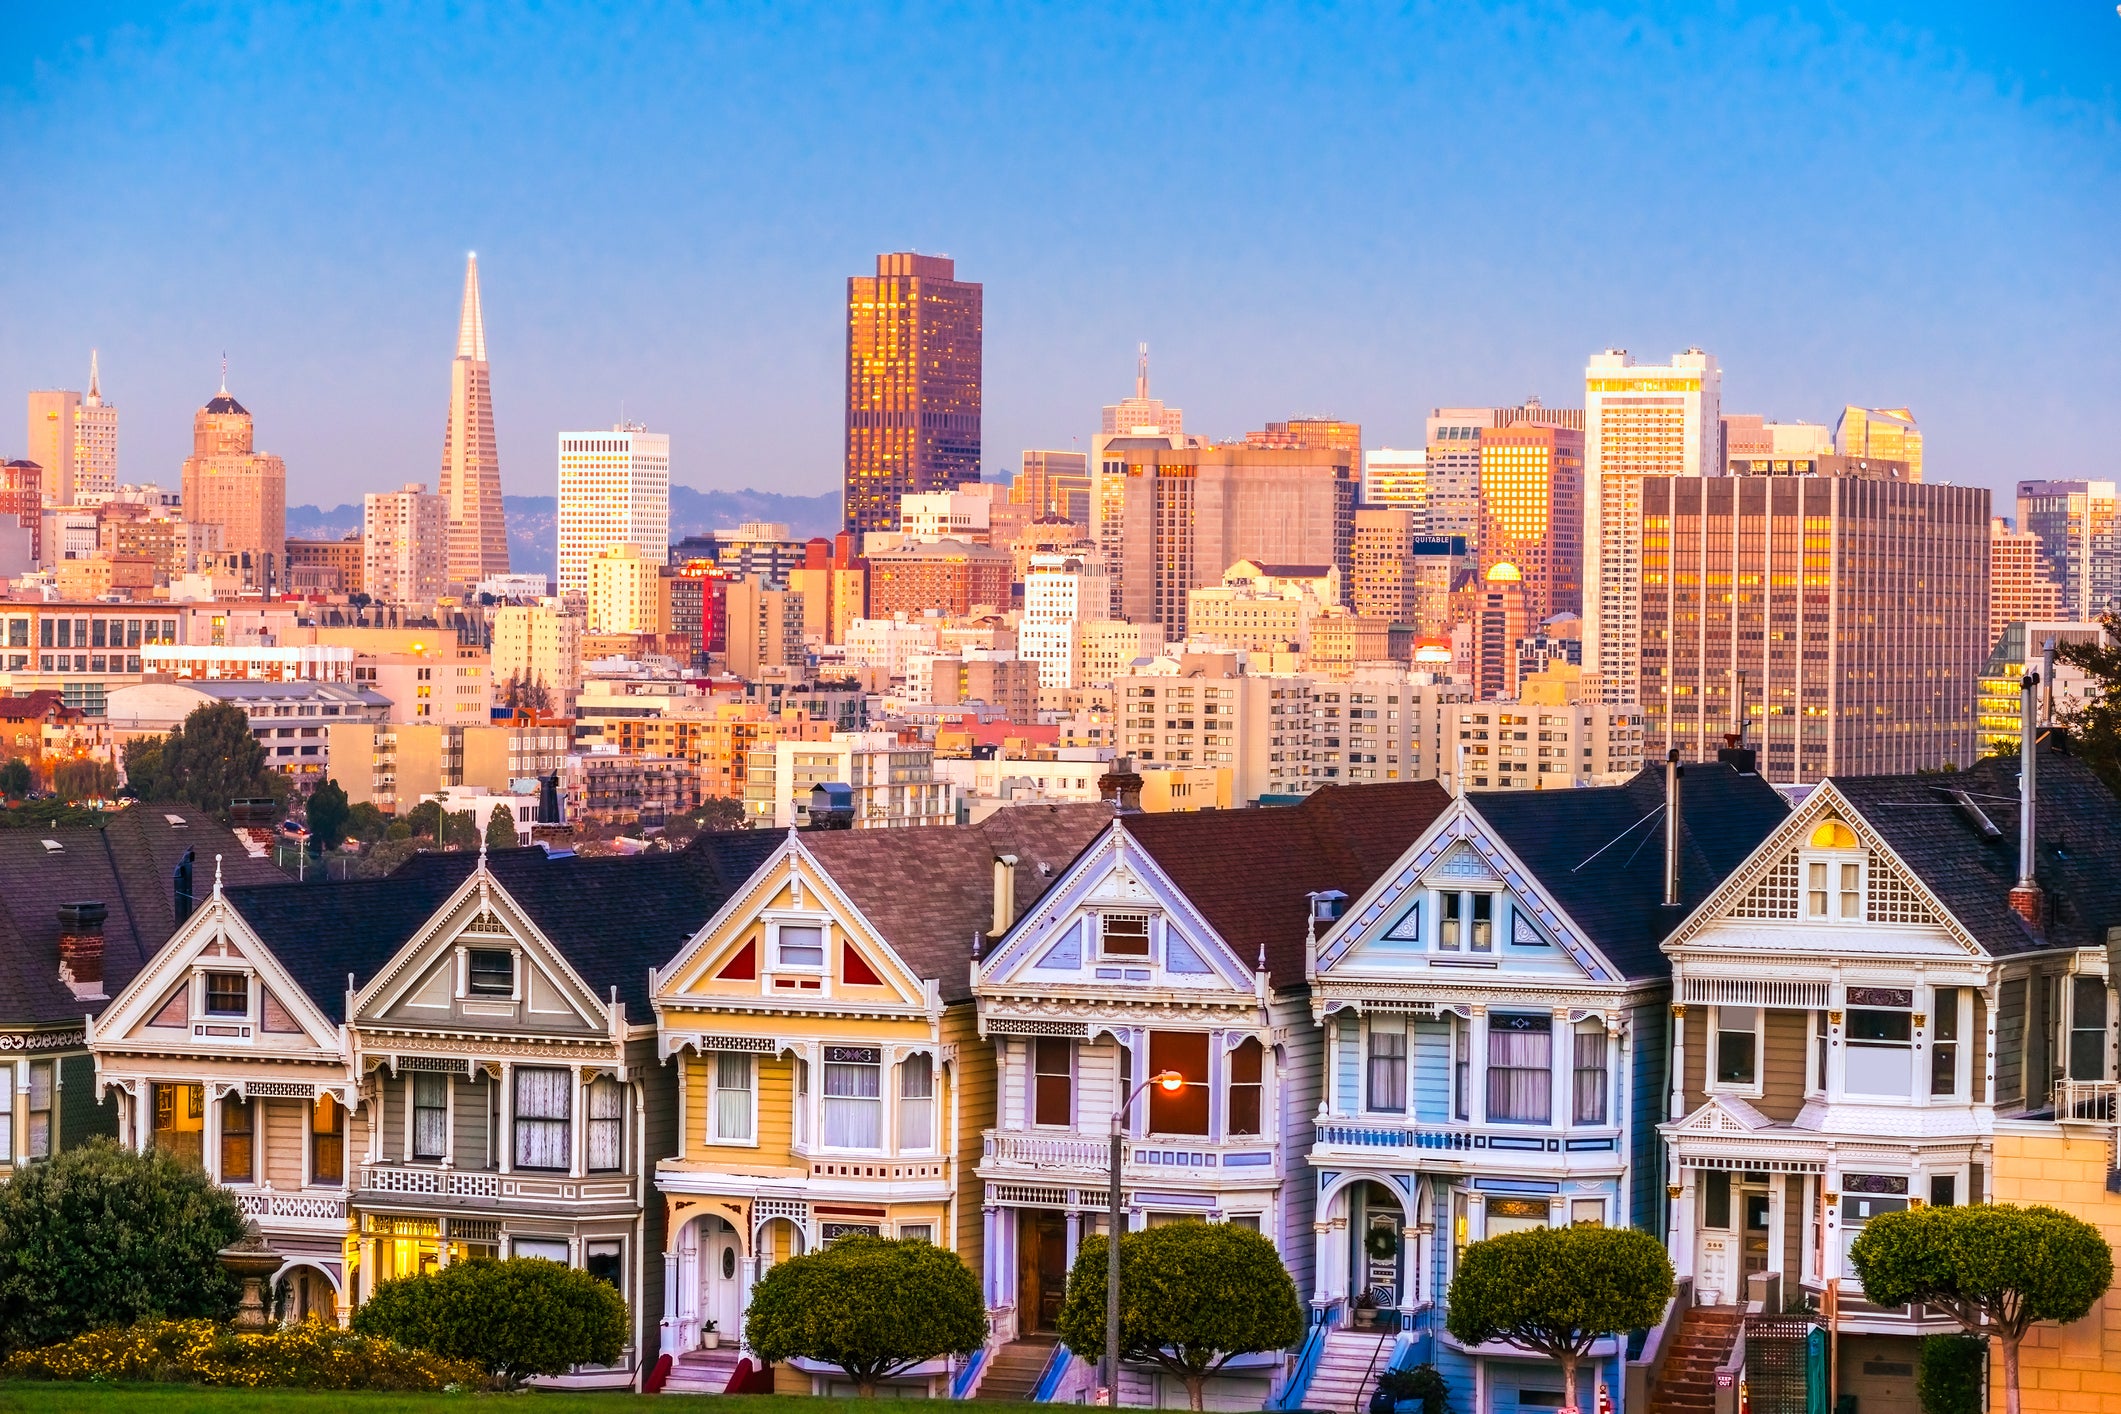 The Painted Ladies of San Francisco, California